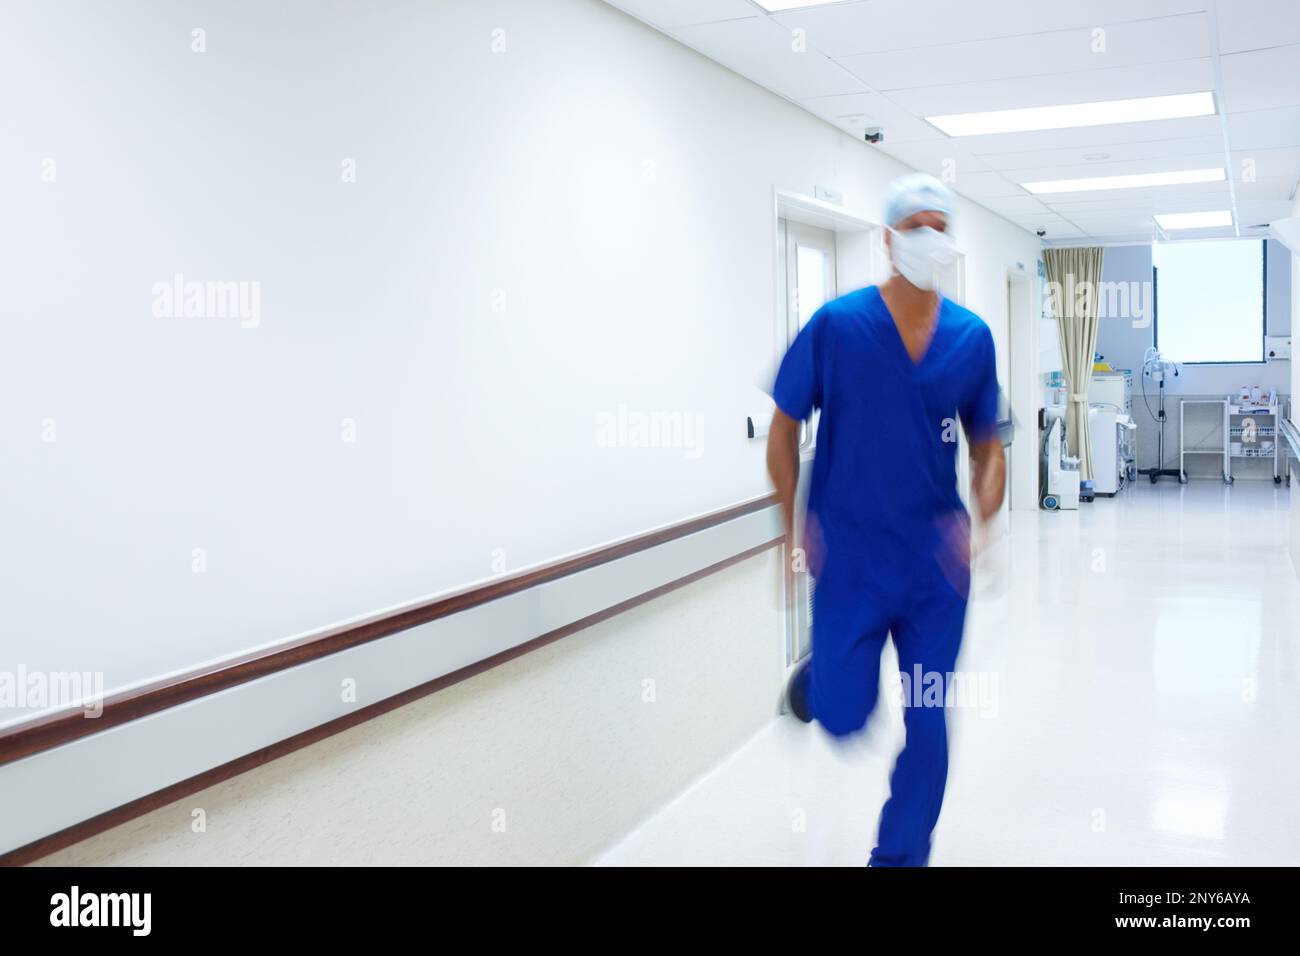 His patients rely on his quick actions. A doctor rushing in the passage of a hospital. Stock Photo